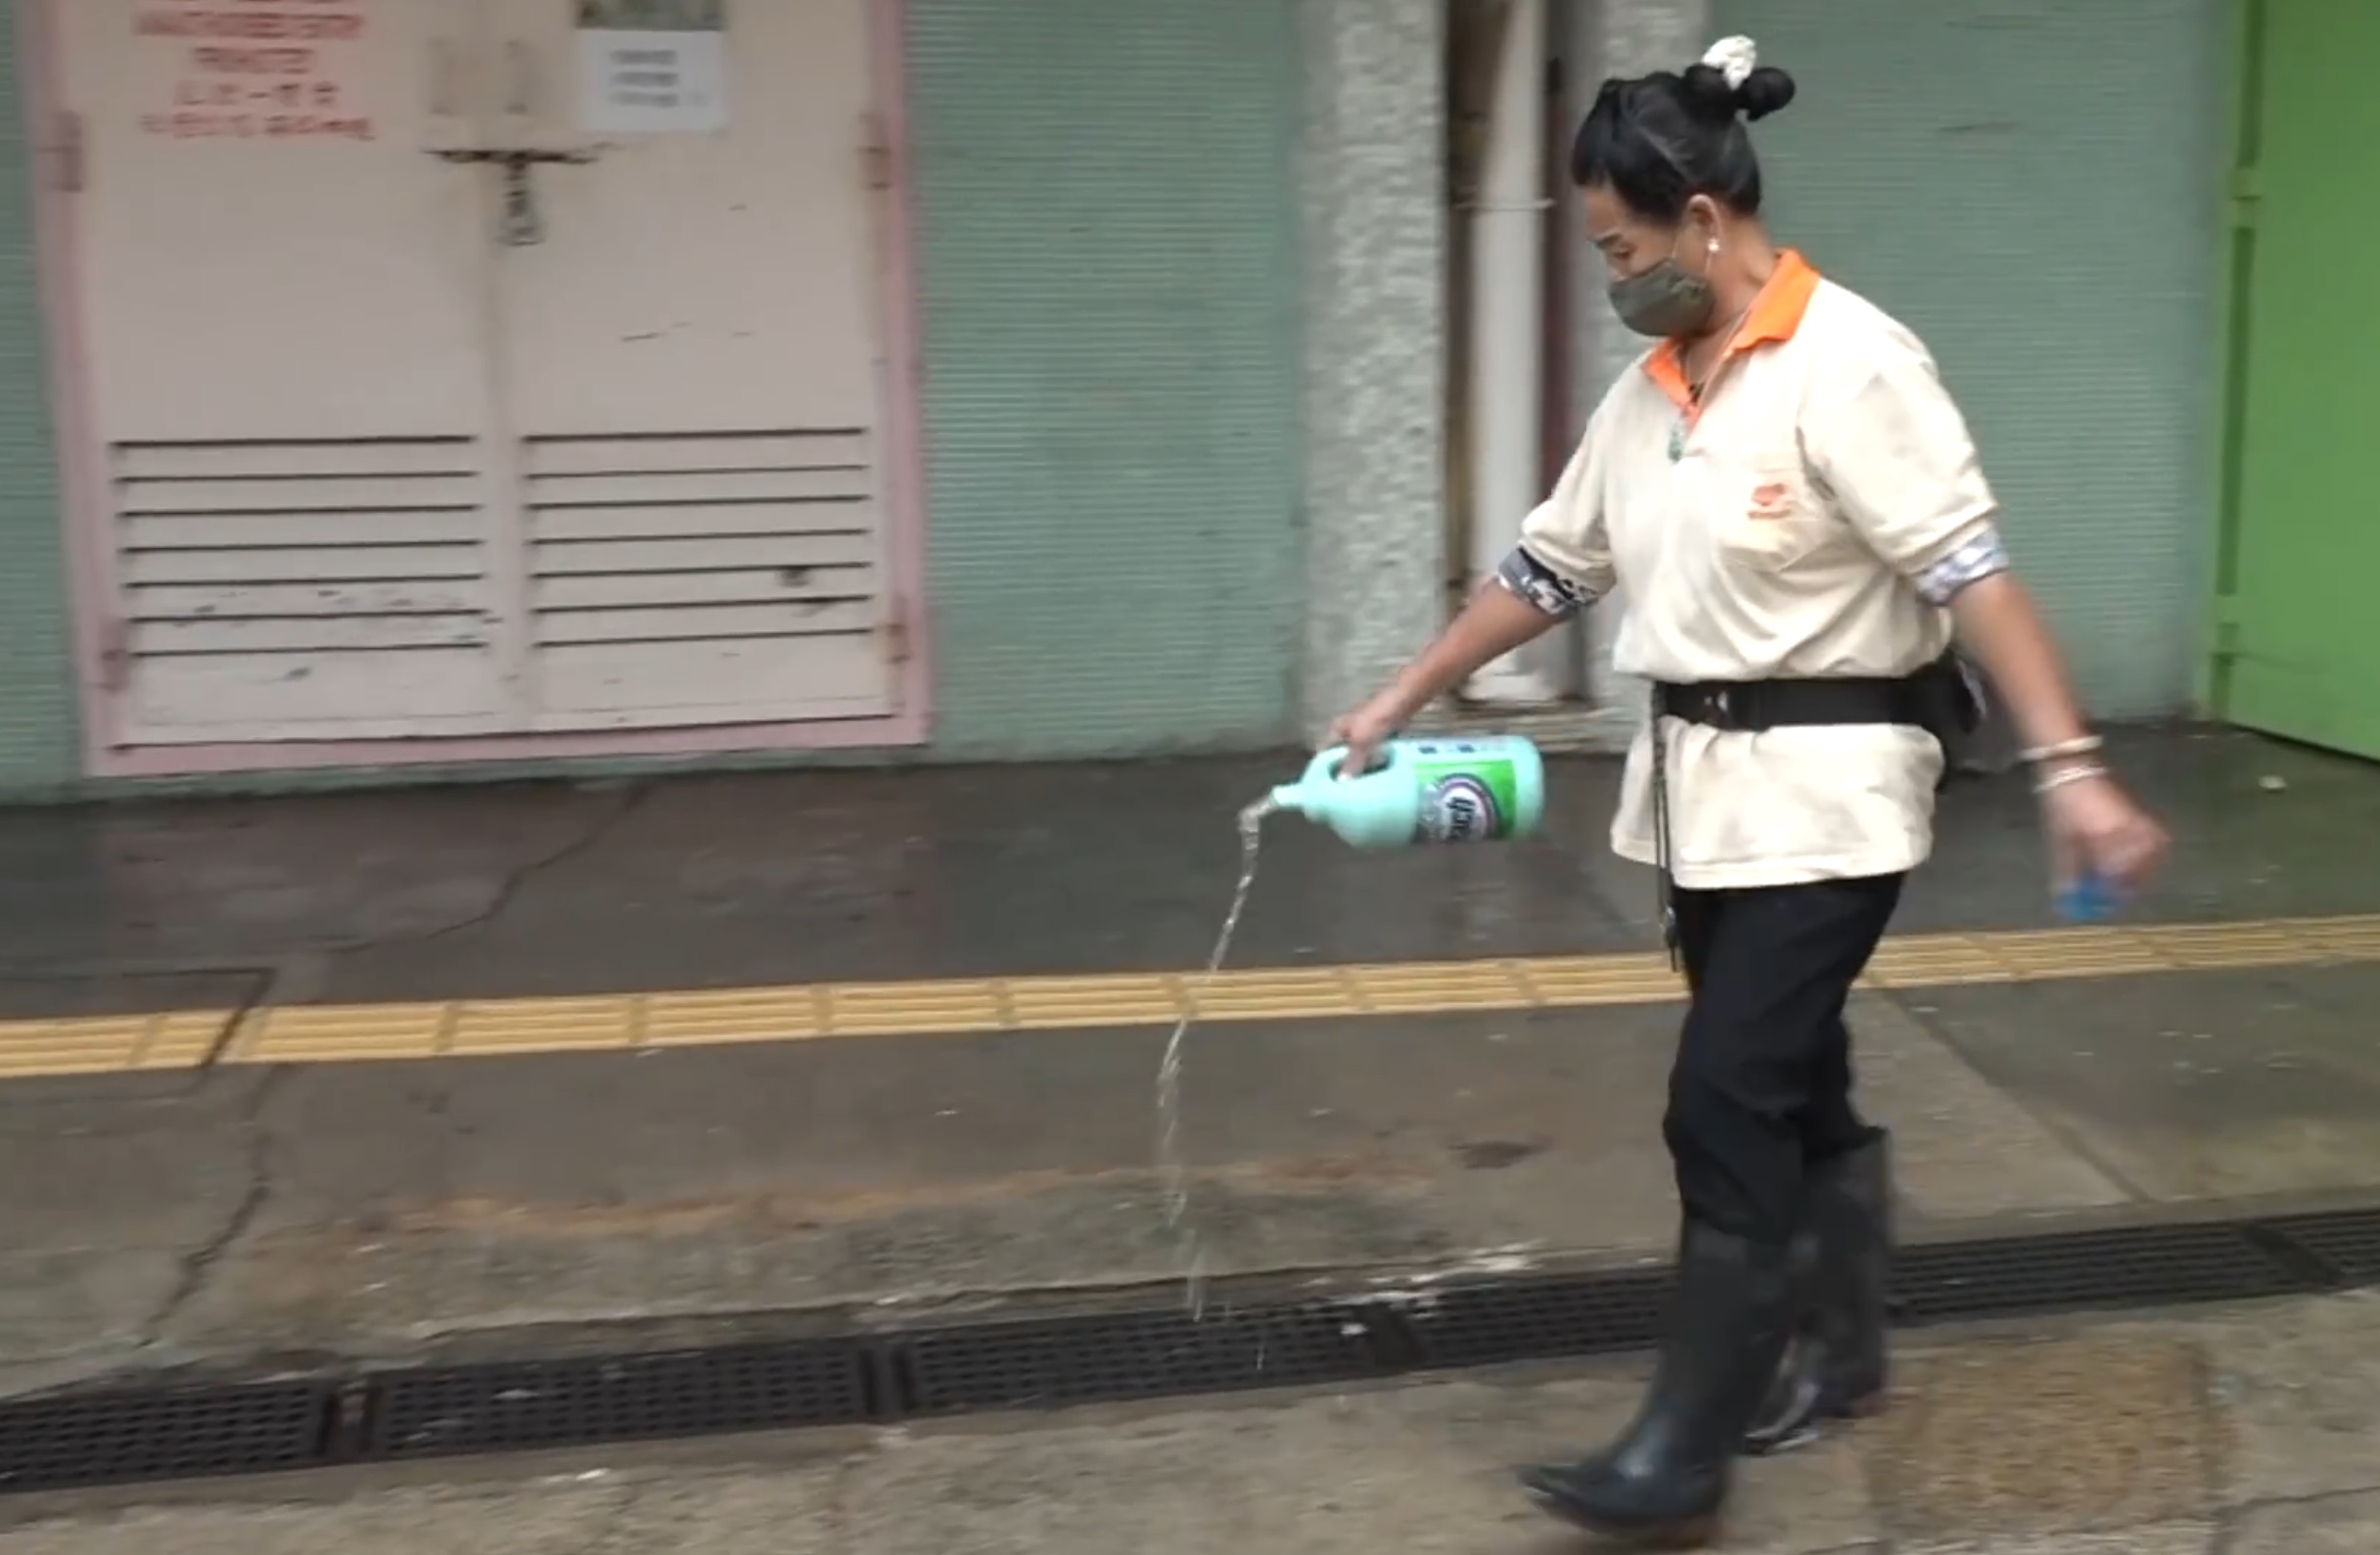 A worker disinfects the entrance of a Tai Po housing block after it was partially evacuated over fears of coronavirus transmissions in the building. Screengrab via Facebook/RTHK.